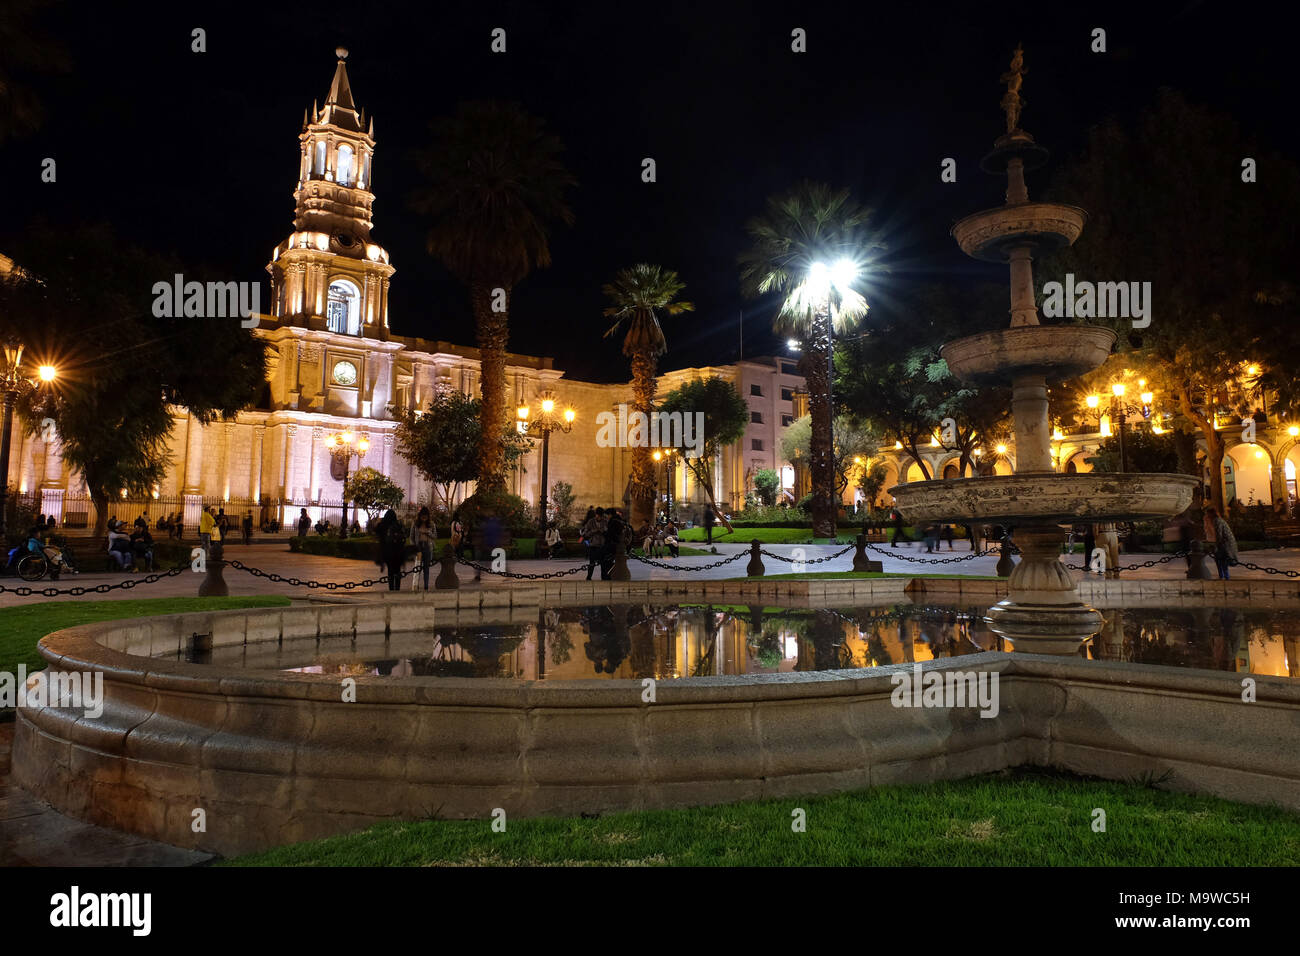 The Plaza de Armas in Arequipa at night with the fountain in the foreground Basilica Cathedral of Arequipa illuminated in the background. Stock Photo